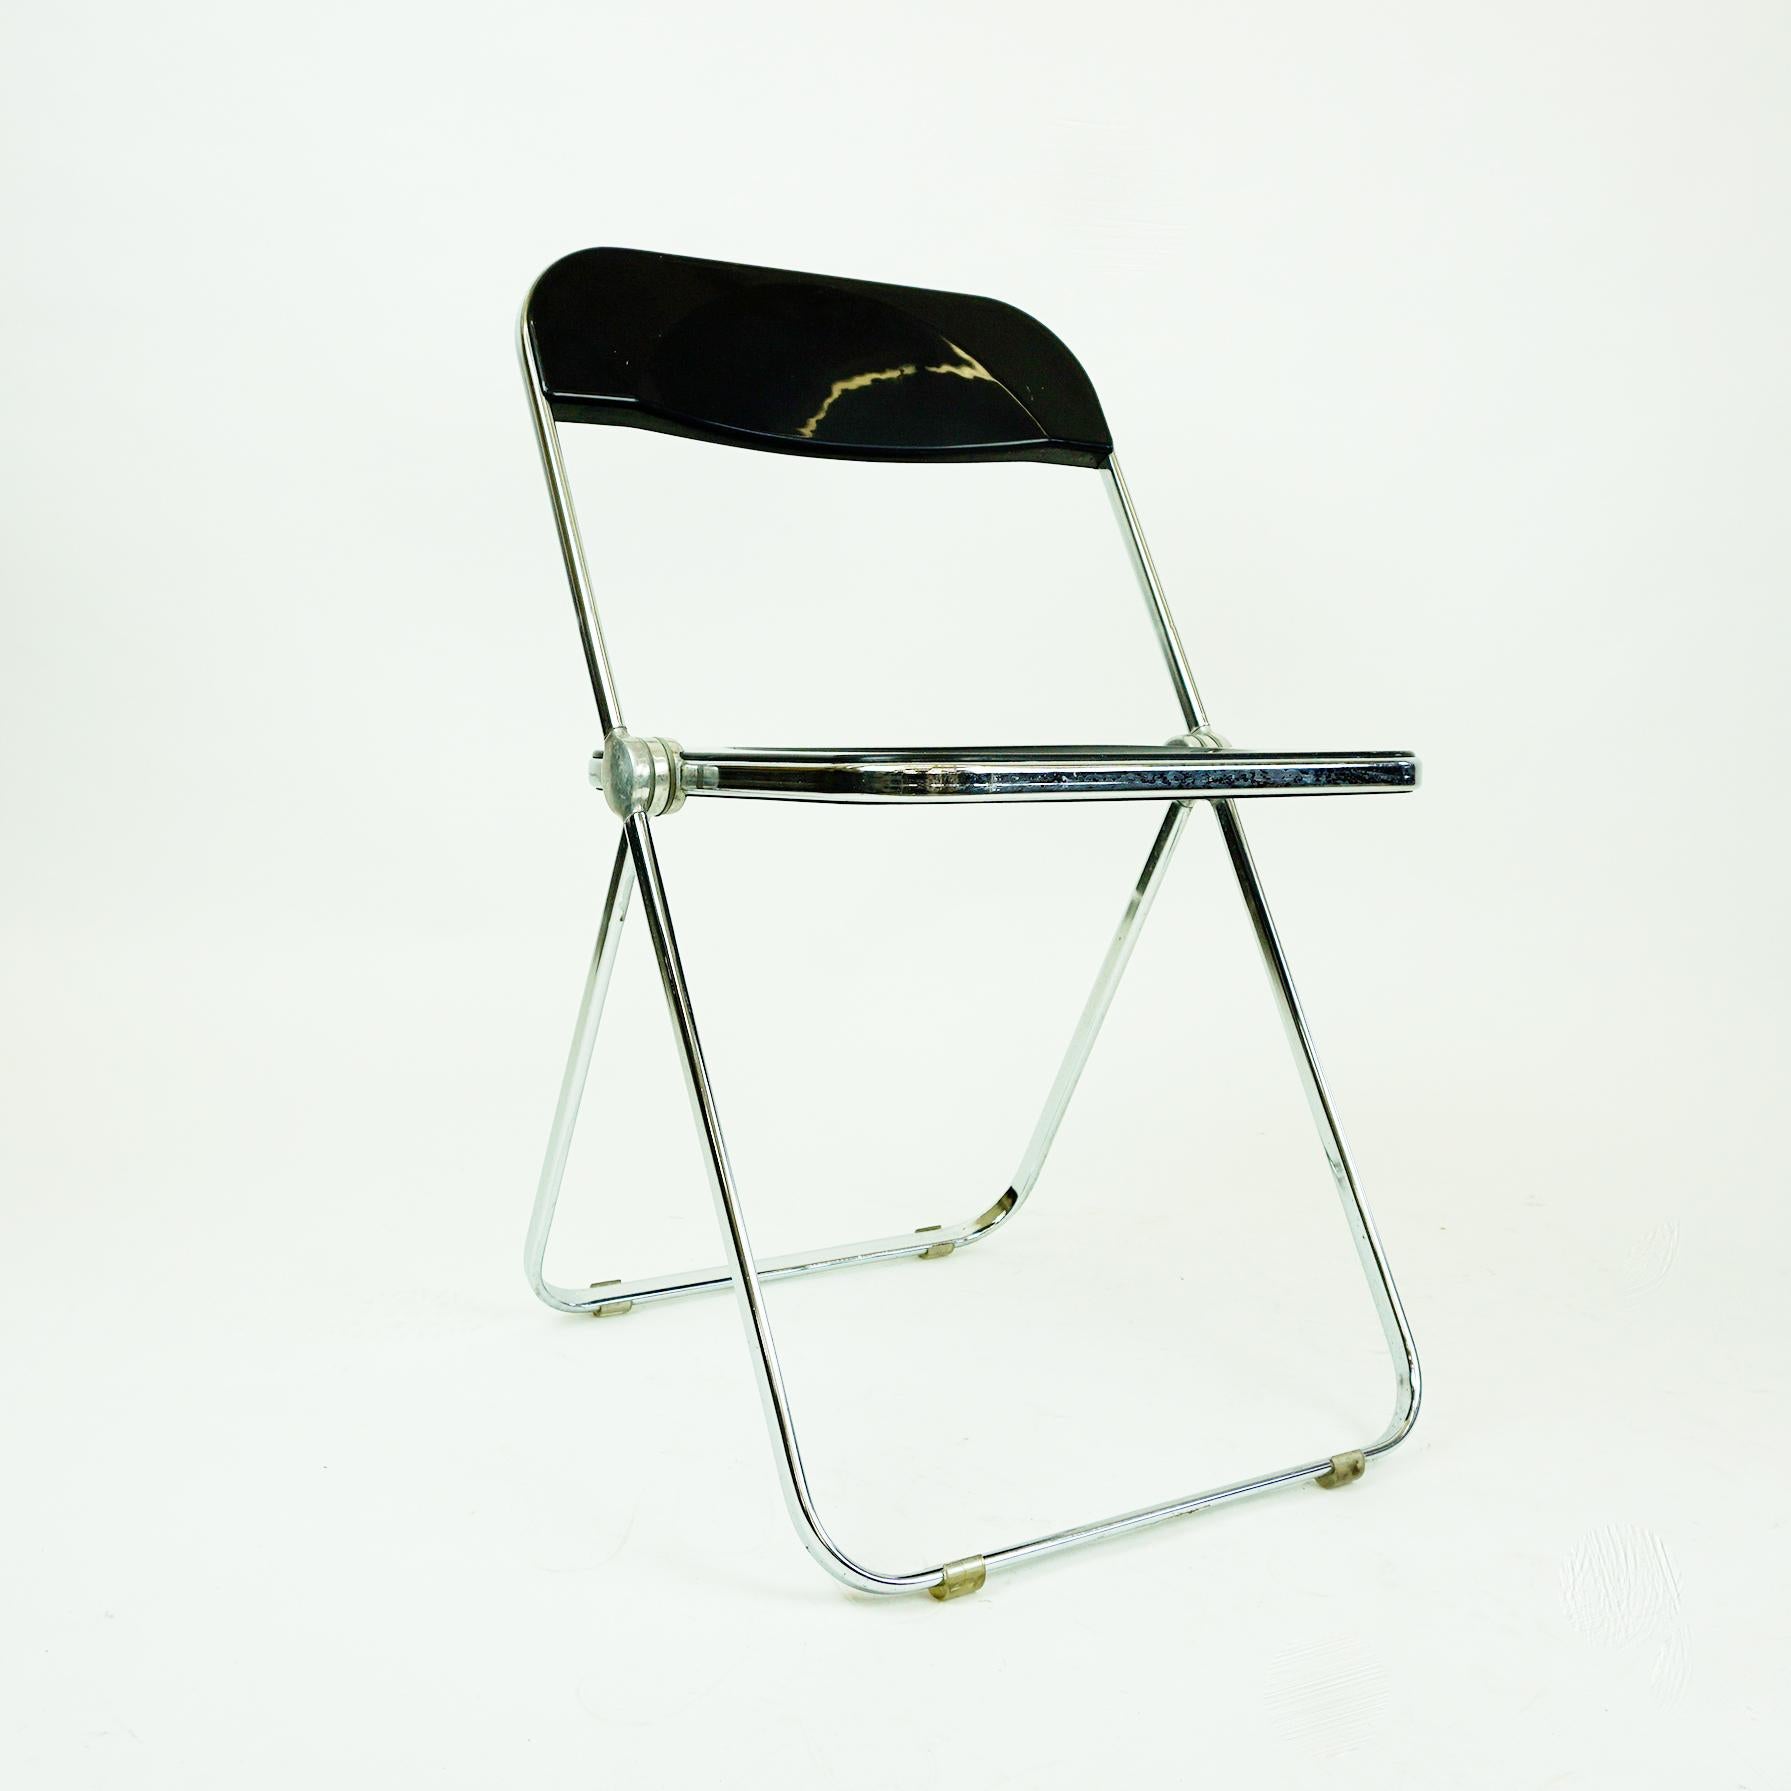 Iconic Italian Mid-Century Modern folding chair in black plastic and chrome, designed by Giancarlo Piretti 1967 for Anonima Castelli, Italy. The Plia folding chair is a real design Classic as it won several prices and is part of the MoMA collection